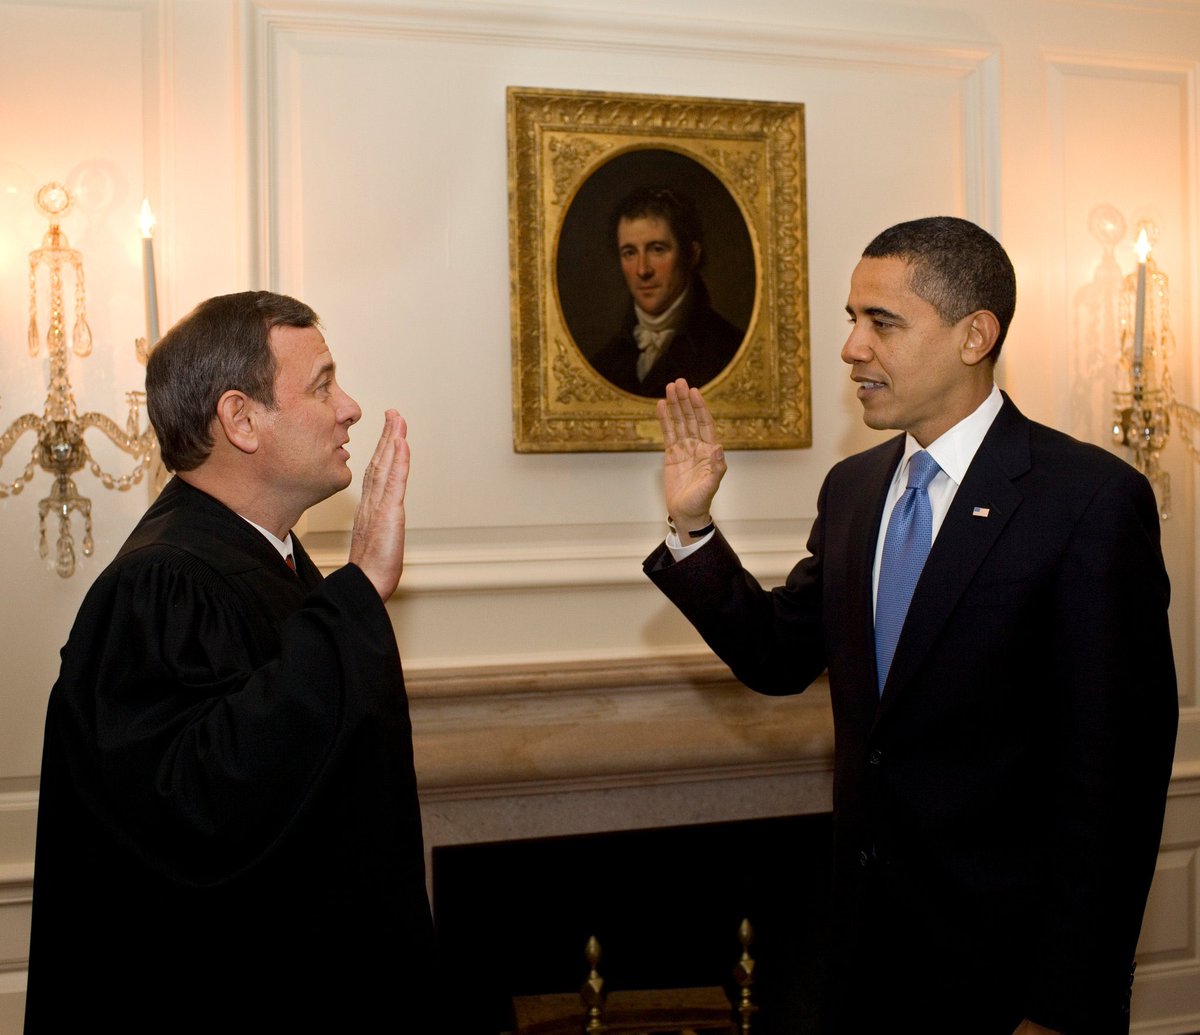 44. Barack Obama took the oath of office a second time out of "an abundance of caution" the day following his first Inauguration in 2009 when Chief Justice John Roberts switched the word order when he administered the oath on Inauguration day. #PresidentsDay